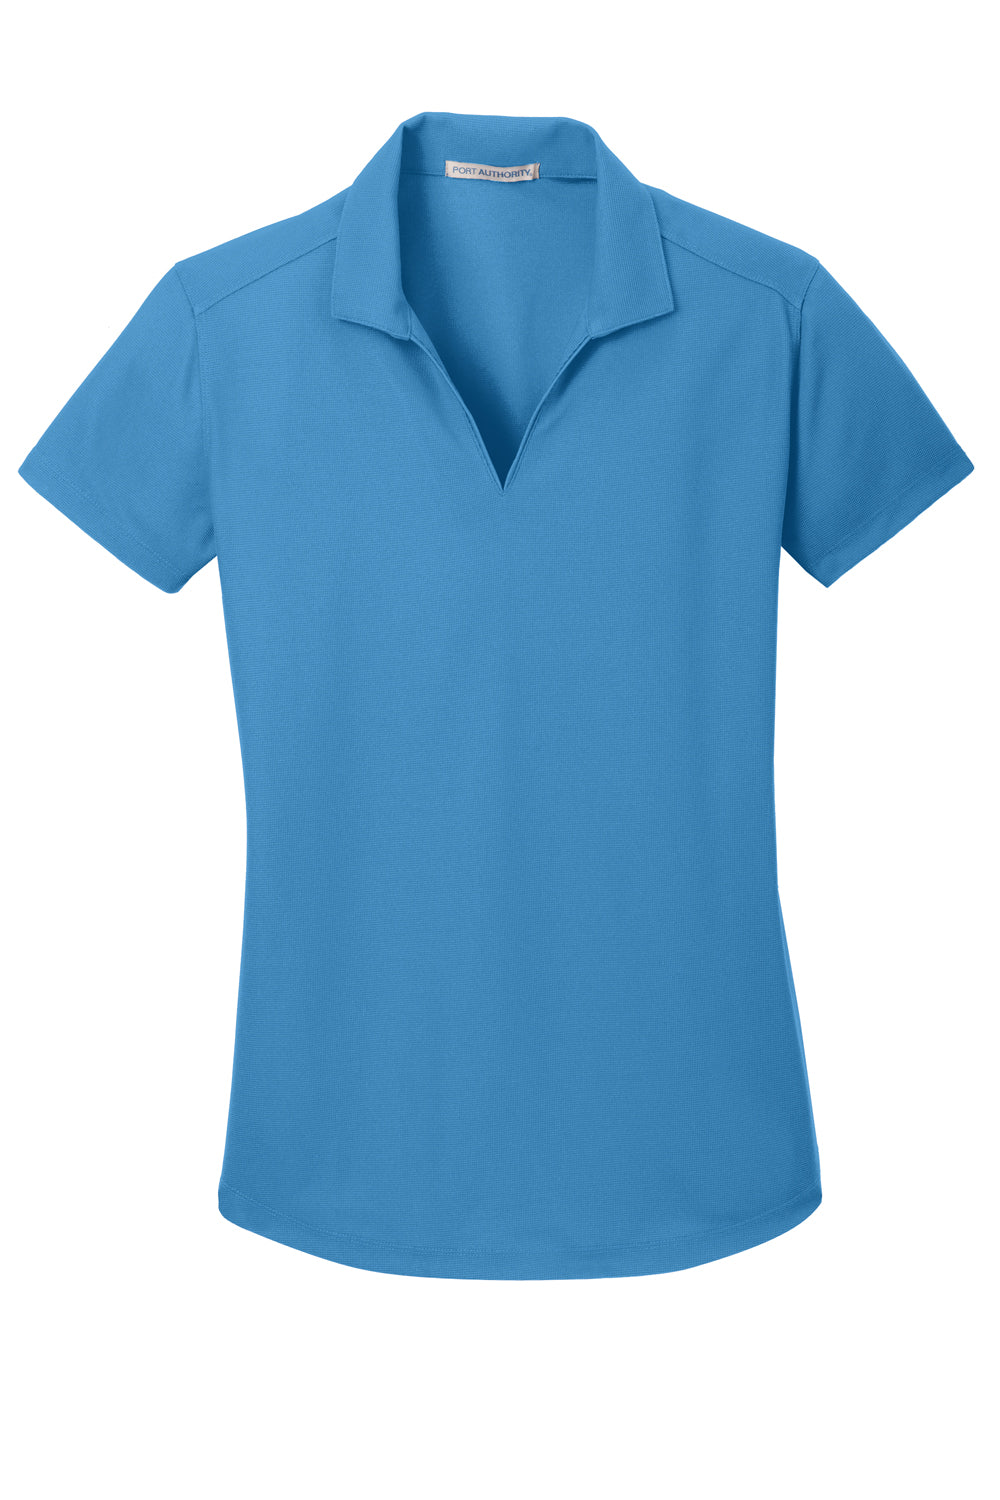 Port Authority L572 Womens Dry Zone Moisture Wicking Short Sleeve Polo Shirt Celadon Blue Flat Front